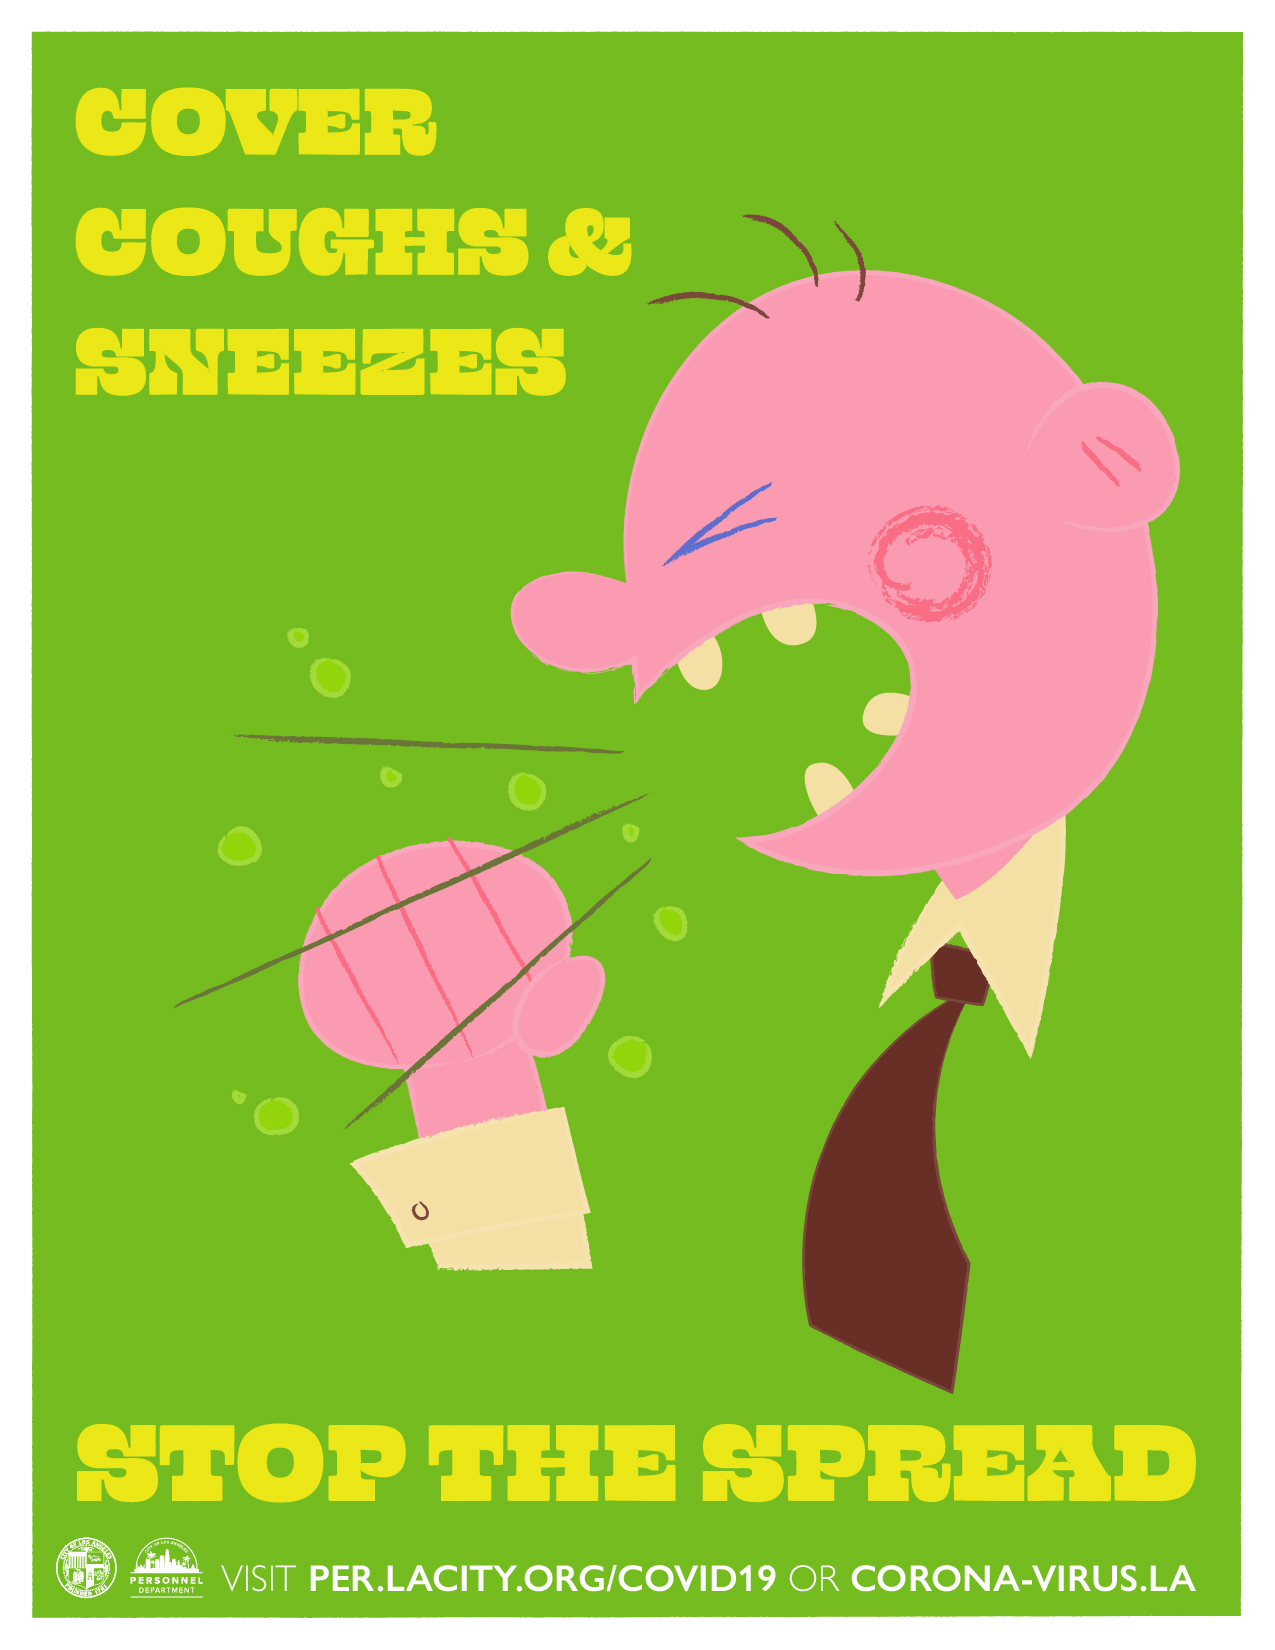 Stop The Spread: Cover Coughs & Sneezes Illustration